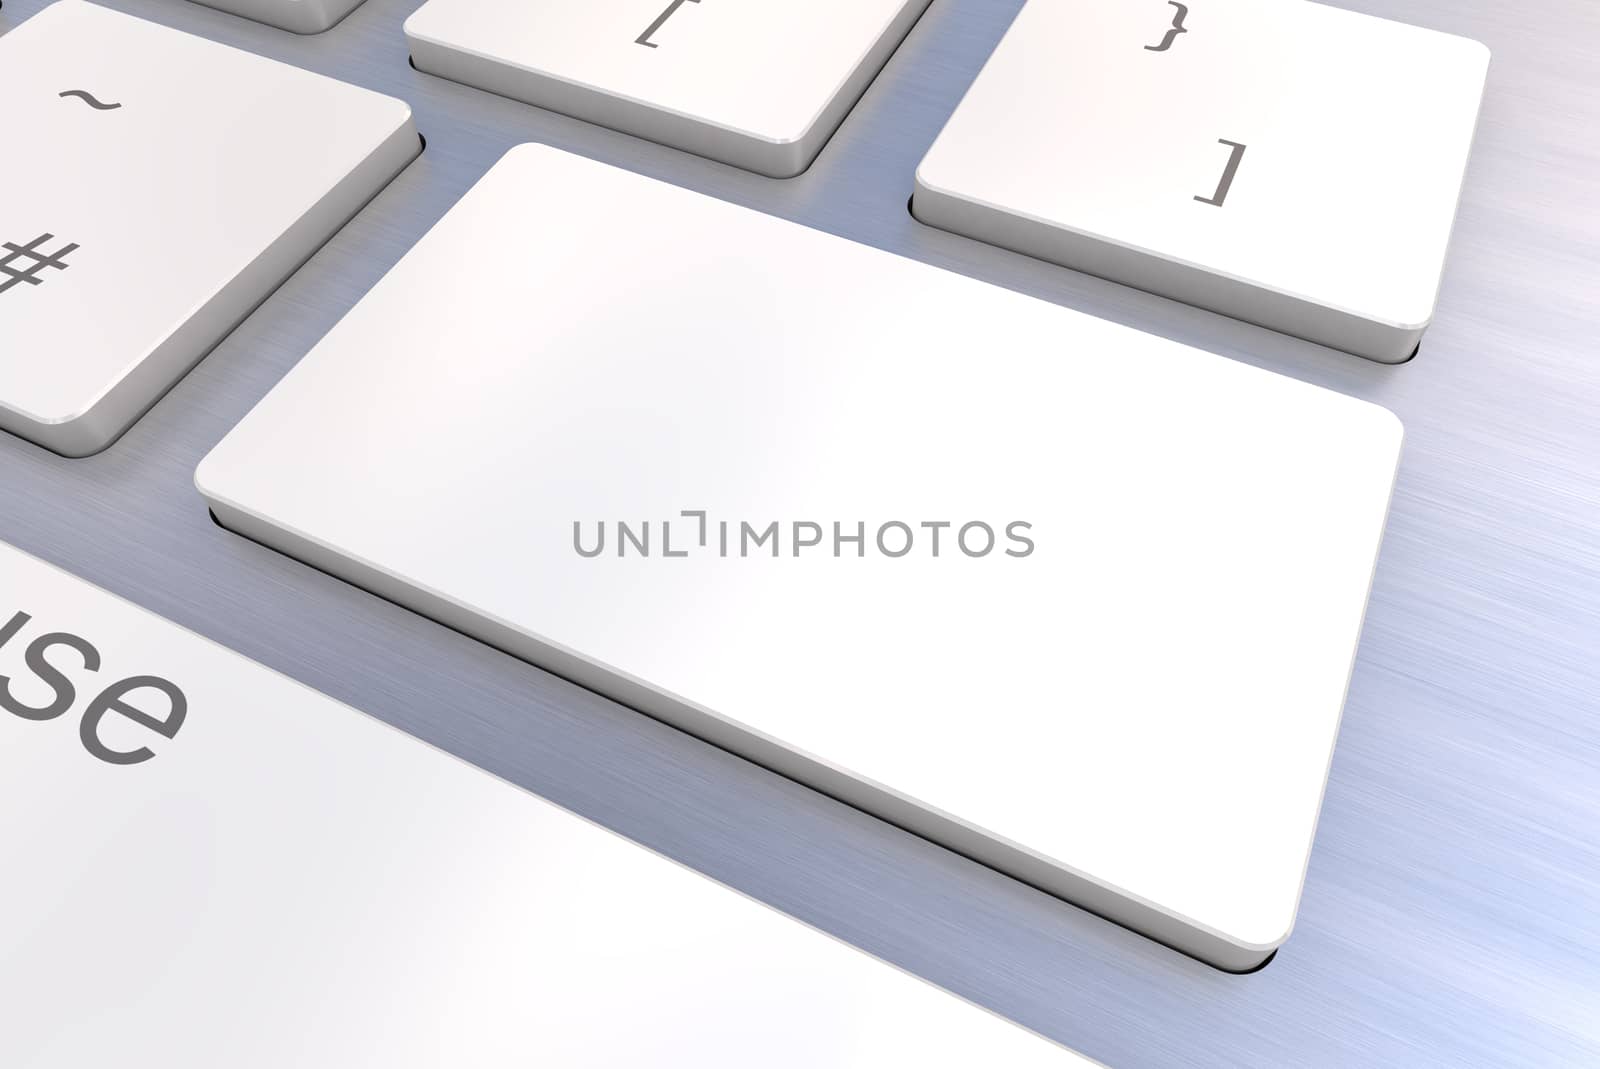 A Colourful 3d Rendered Illustration showing a Blank White Keyboard concept on a Computer Keyboard